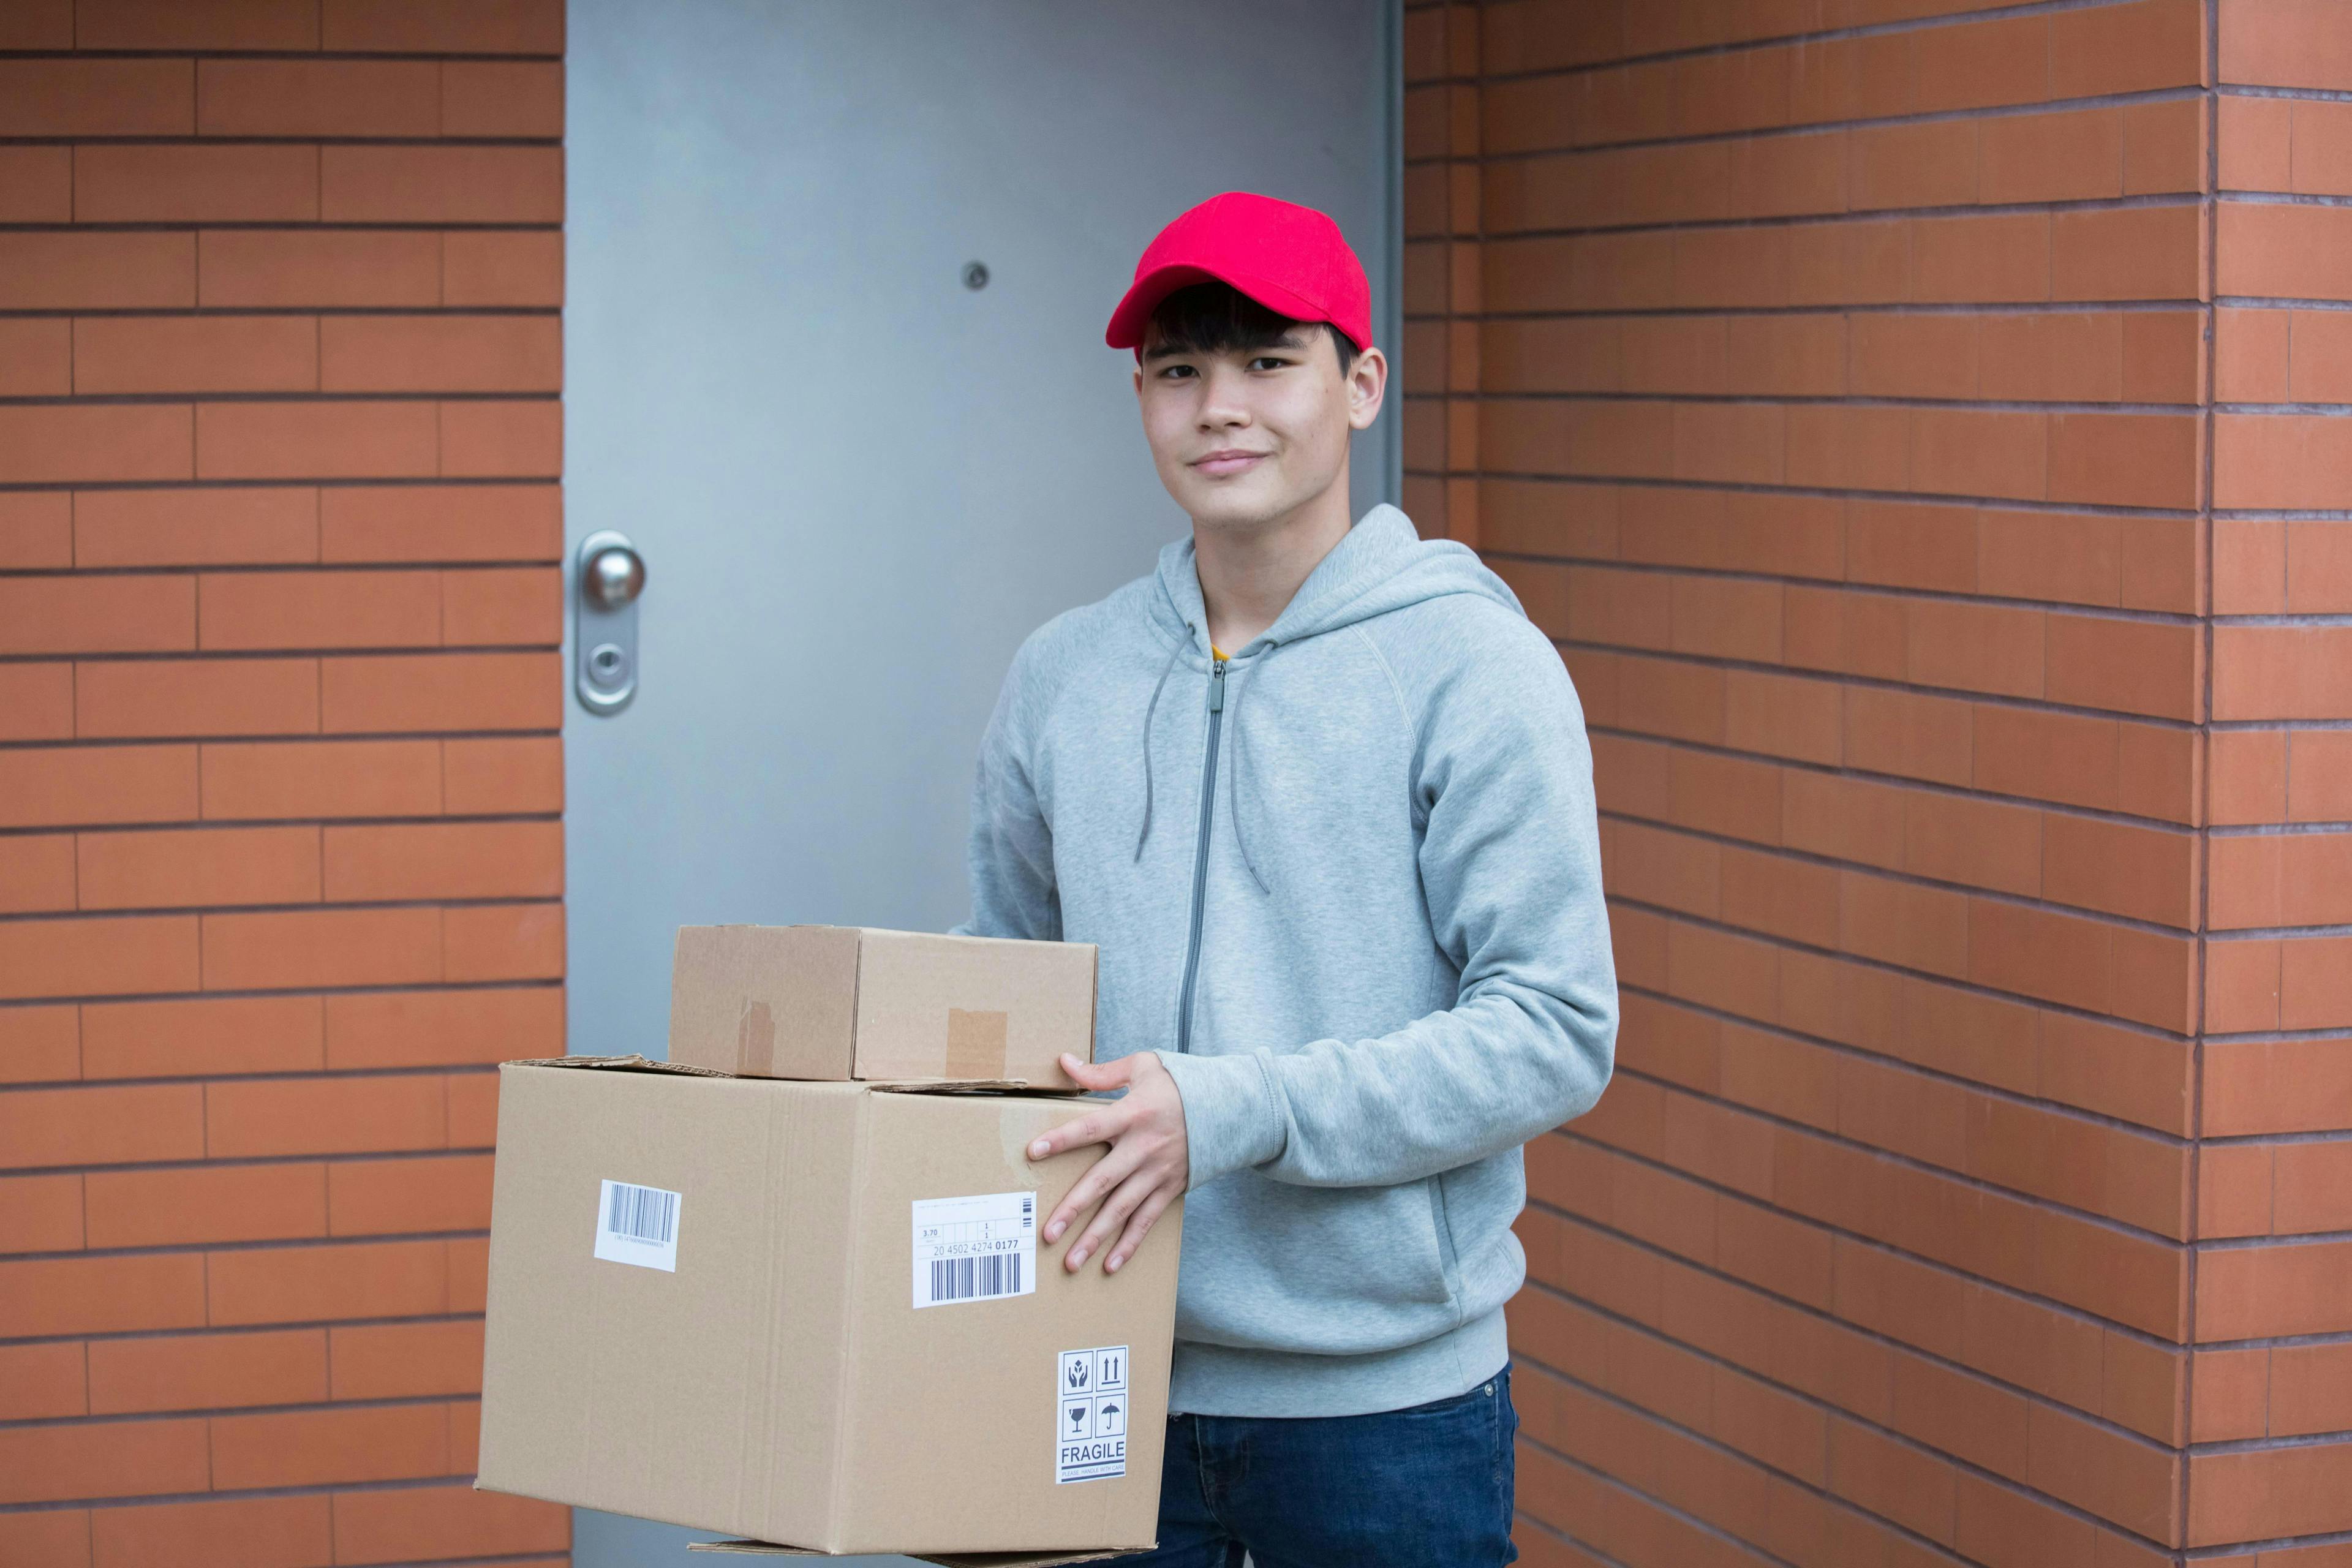  a courier holding packages